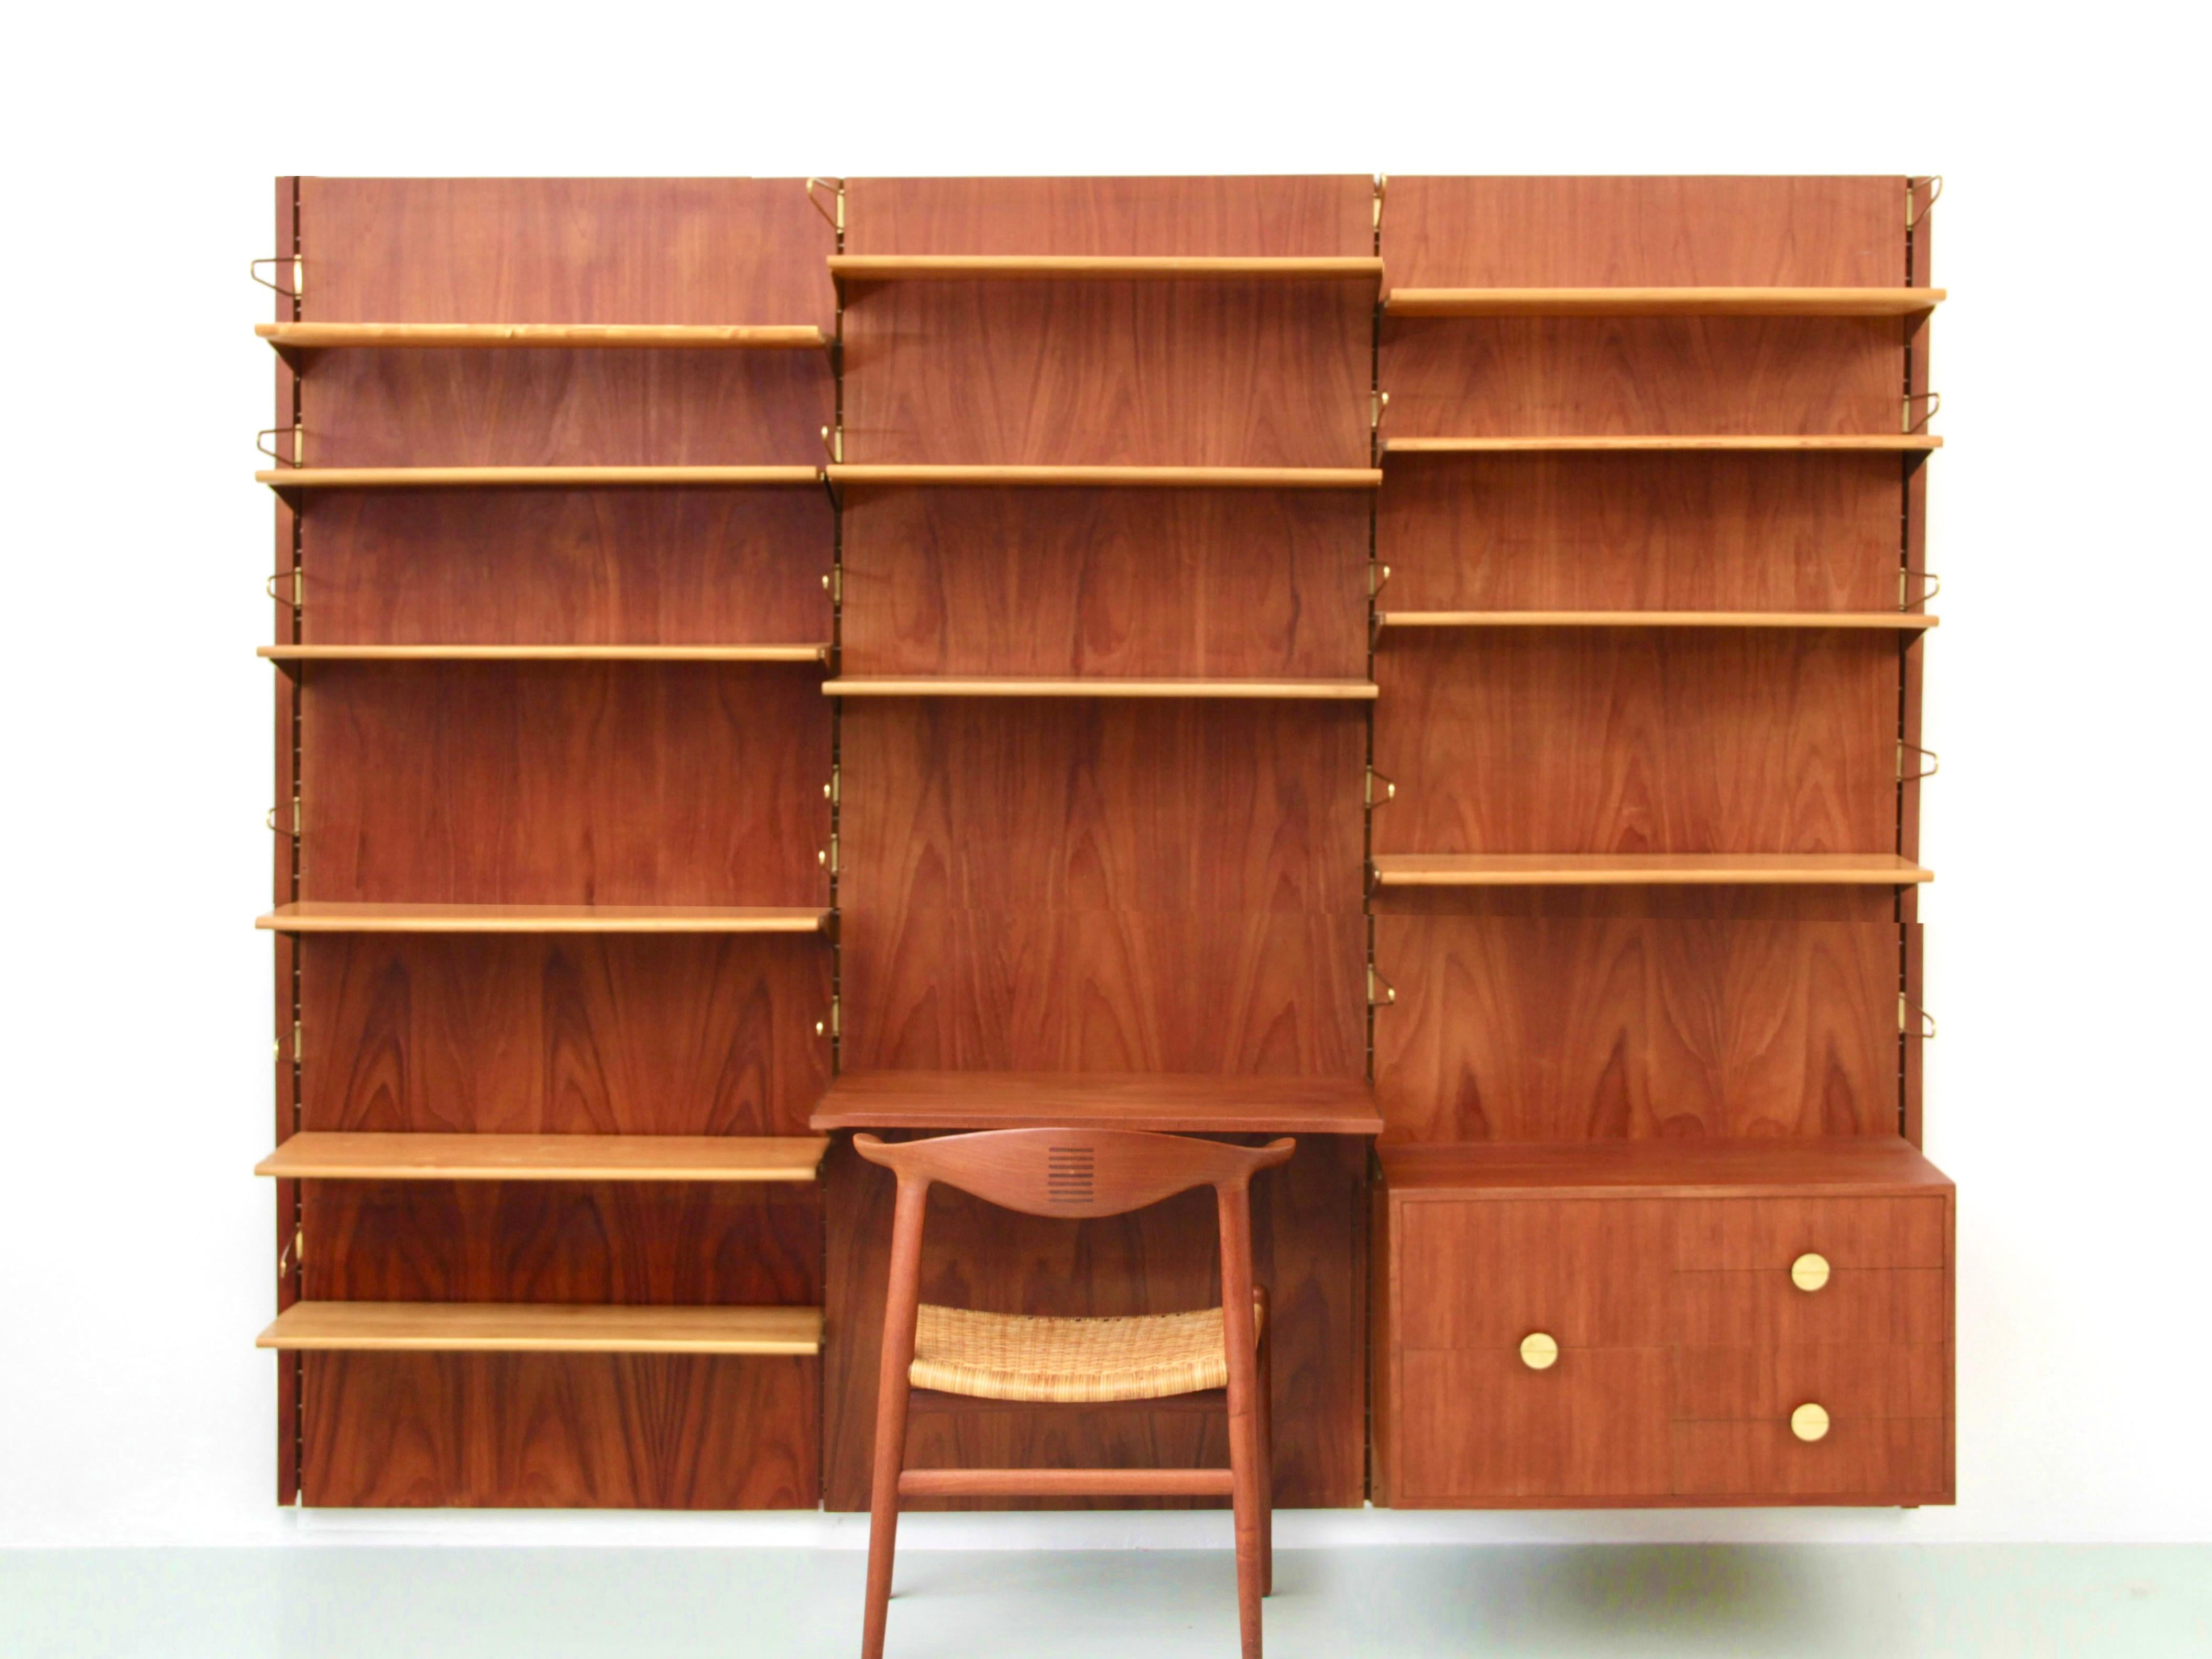 Modular shelving system BO71 in teak by Finn Juhl for Bovirke in the 1960s. Comprising 3 columns, 4 rules, 1 unit with 6 drawers, a writing desk, 13 Oregon pine shelves, and 22 brass bookends. Brass bracket system.

H 200 cm. Total W 234 cm. Shelve